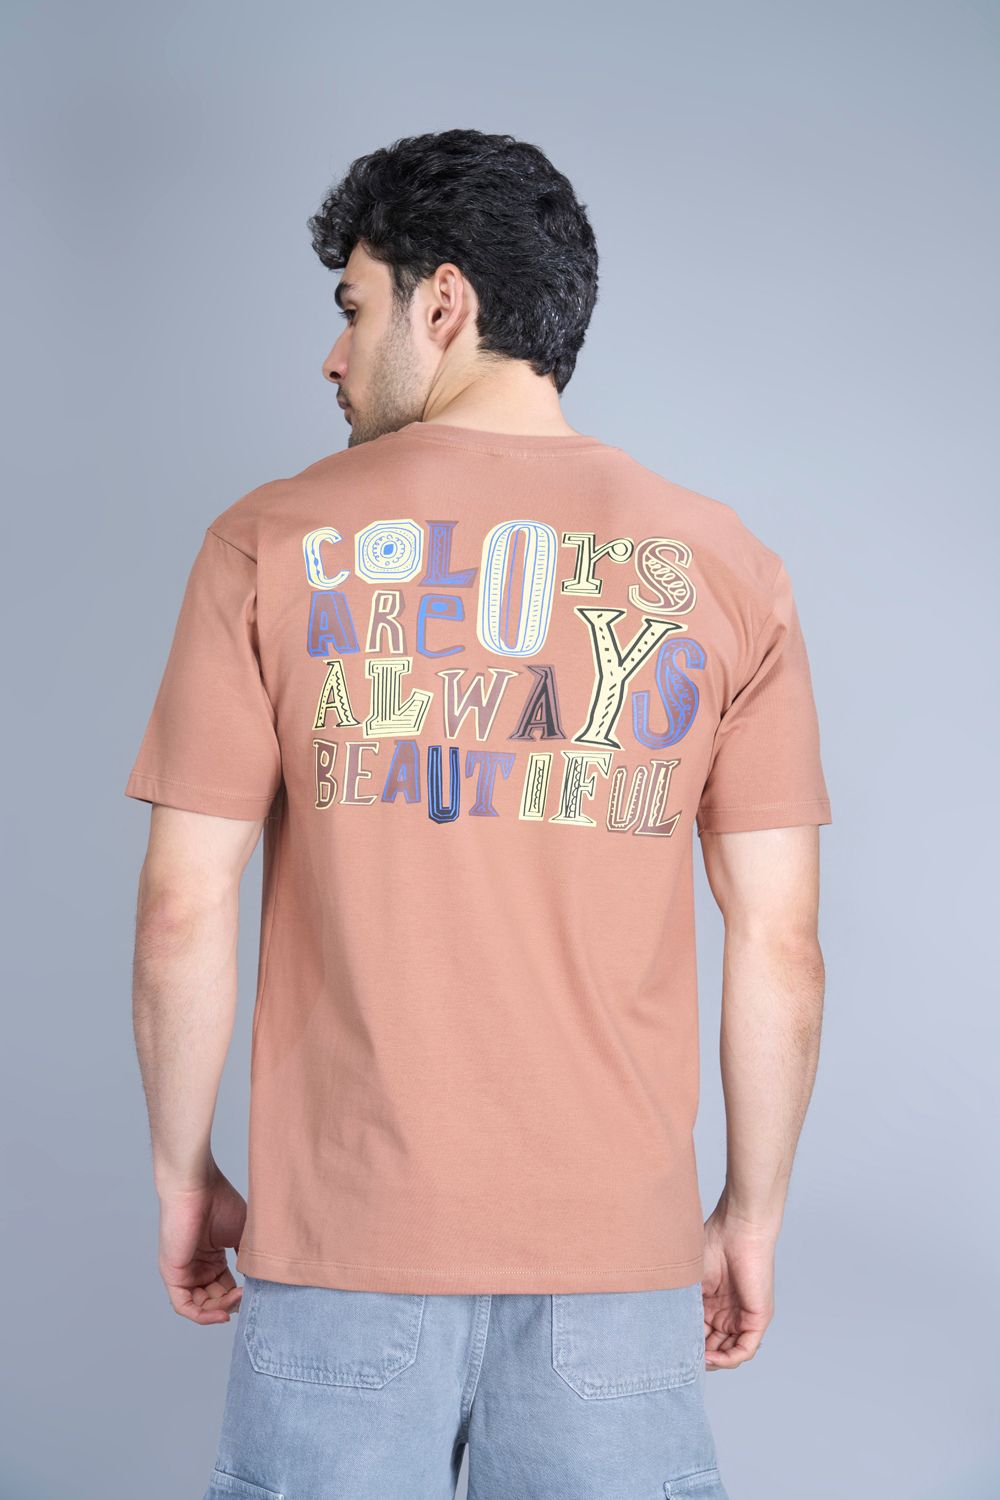 Cotton oversized T shirt for men in the solid color Café cream with half sleeves and crew neck, back view.